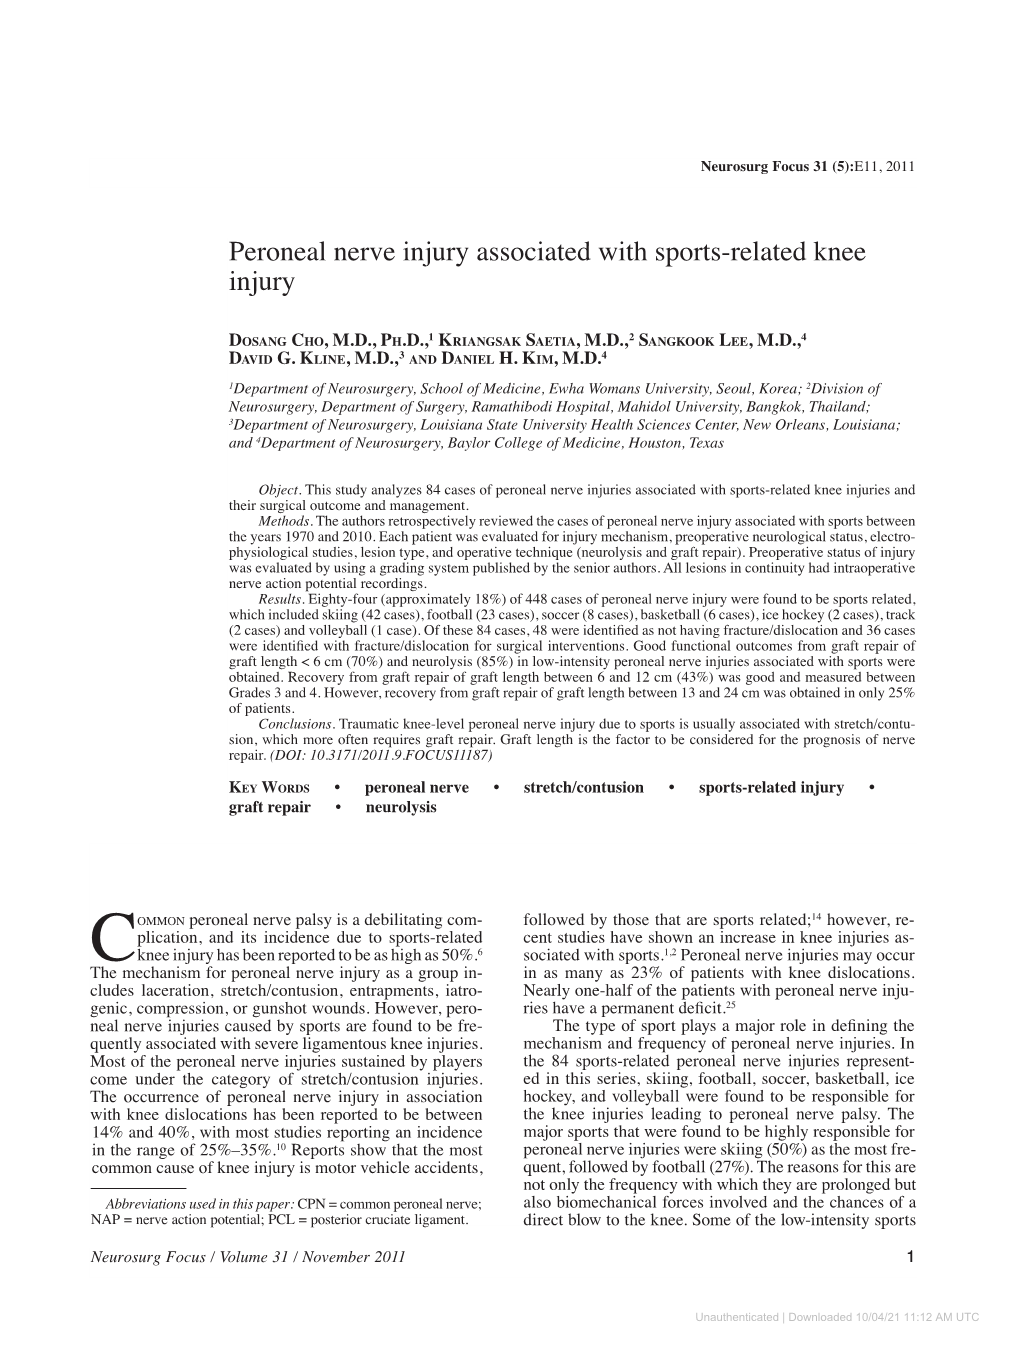 Peroneal Nerve Injury Associated with Sports-Related Knee Injury